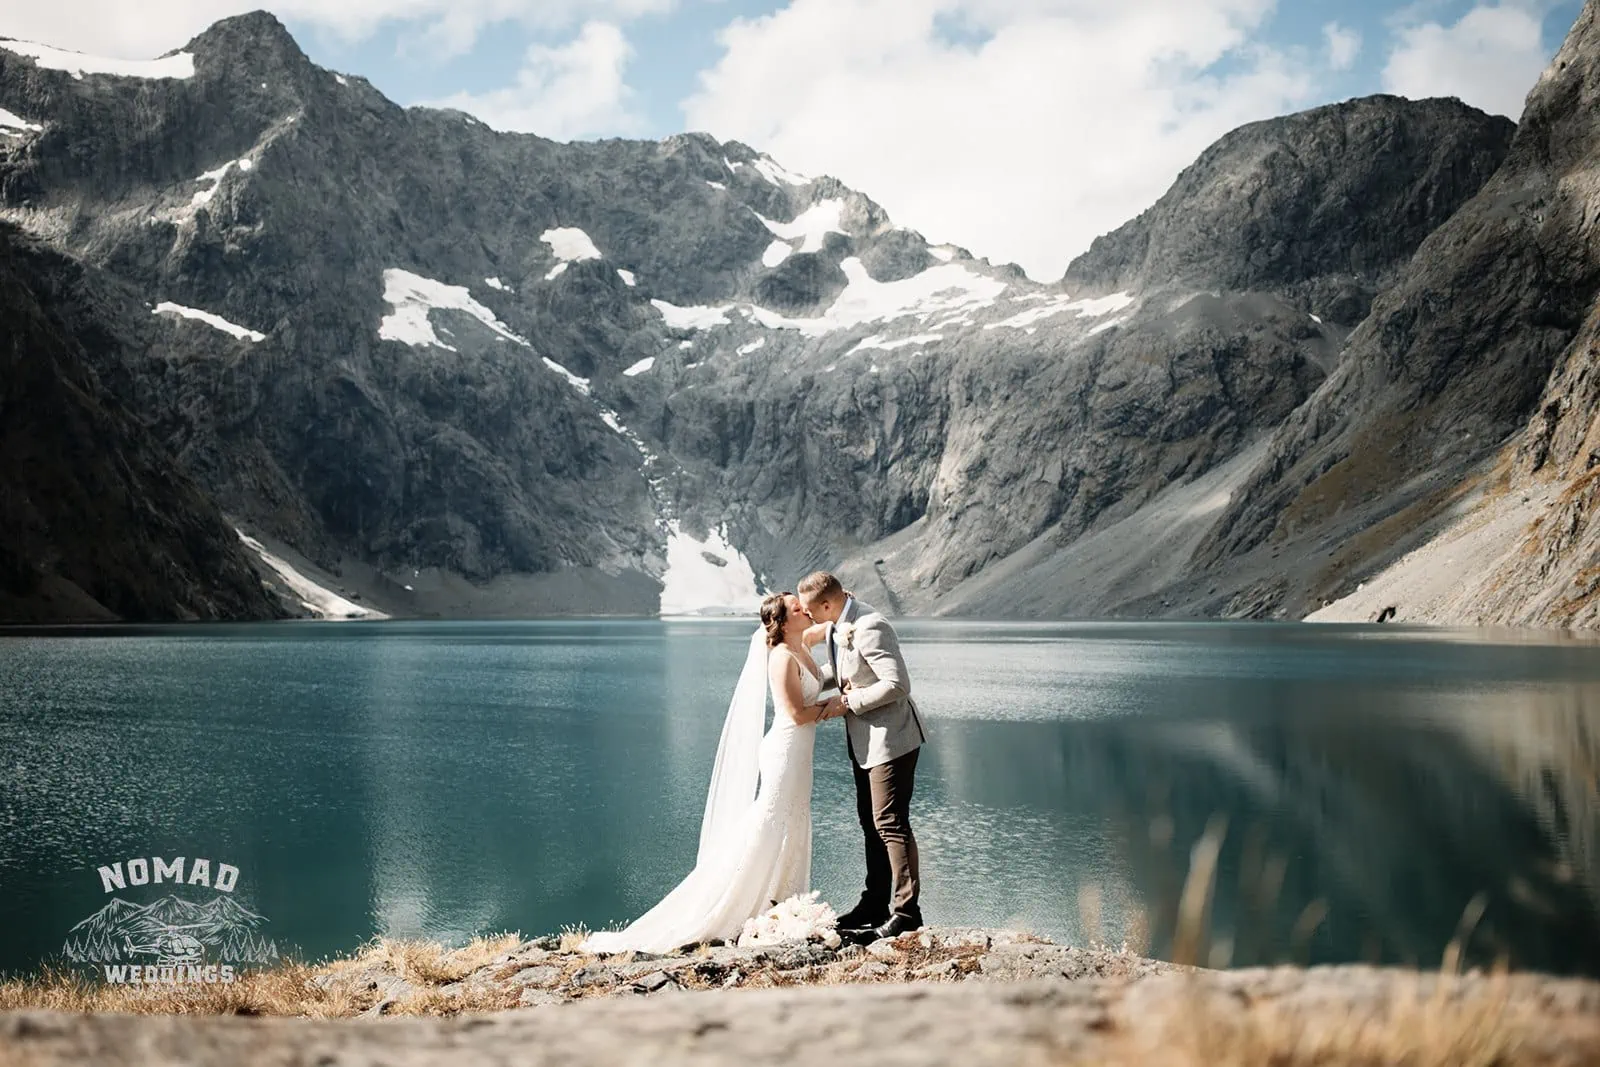 Amy and Eden share an enchanting kiss during their Lake Erskine heli elopement wedding.